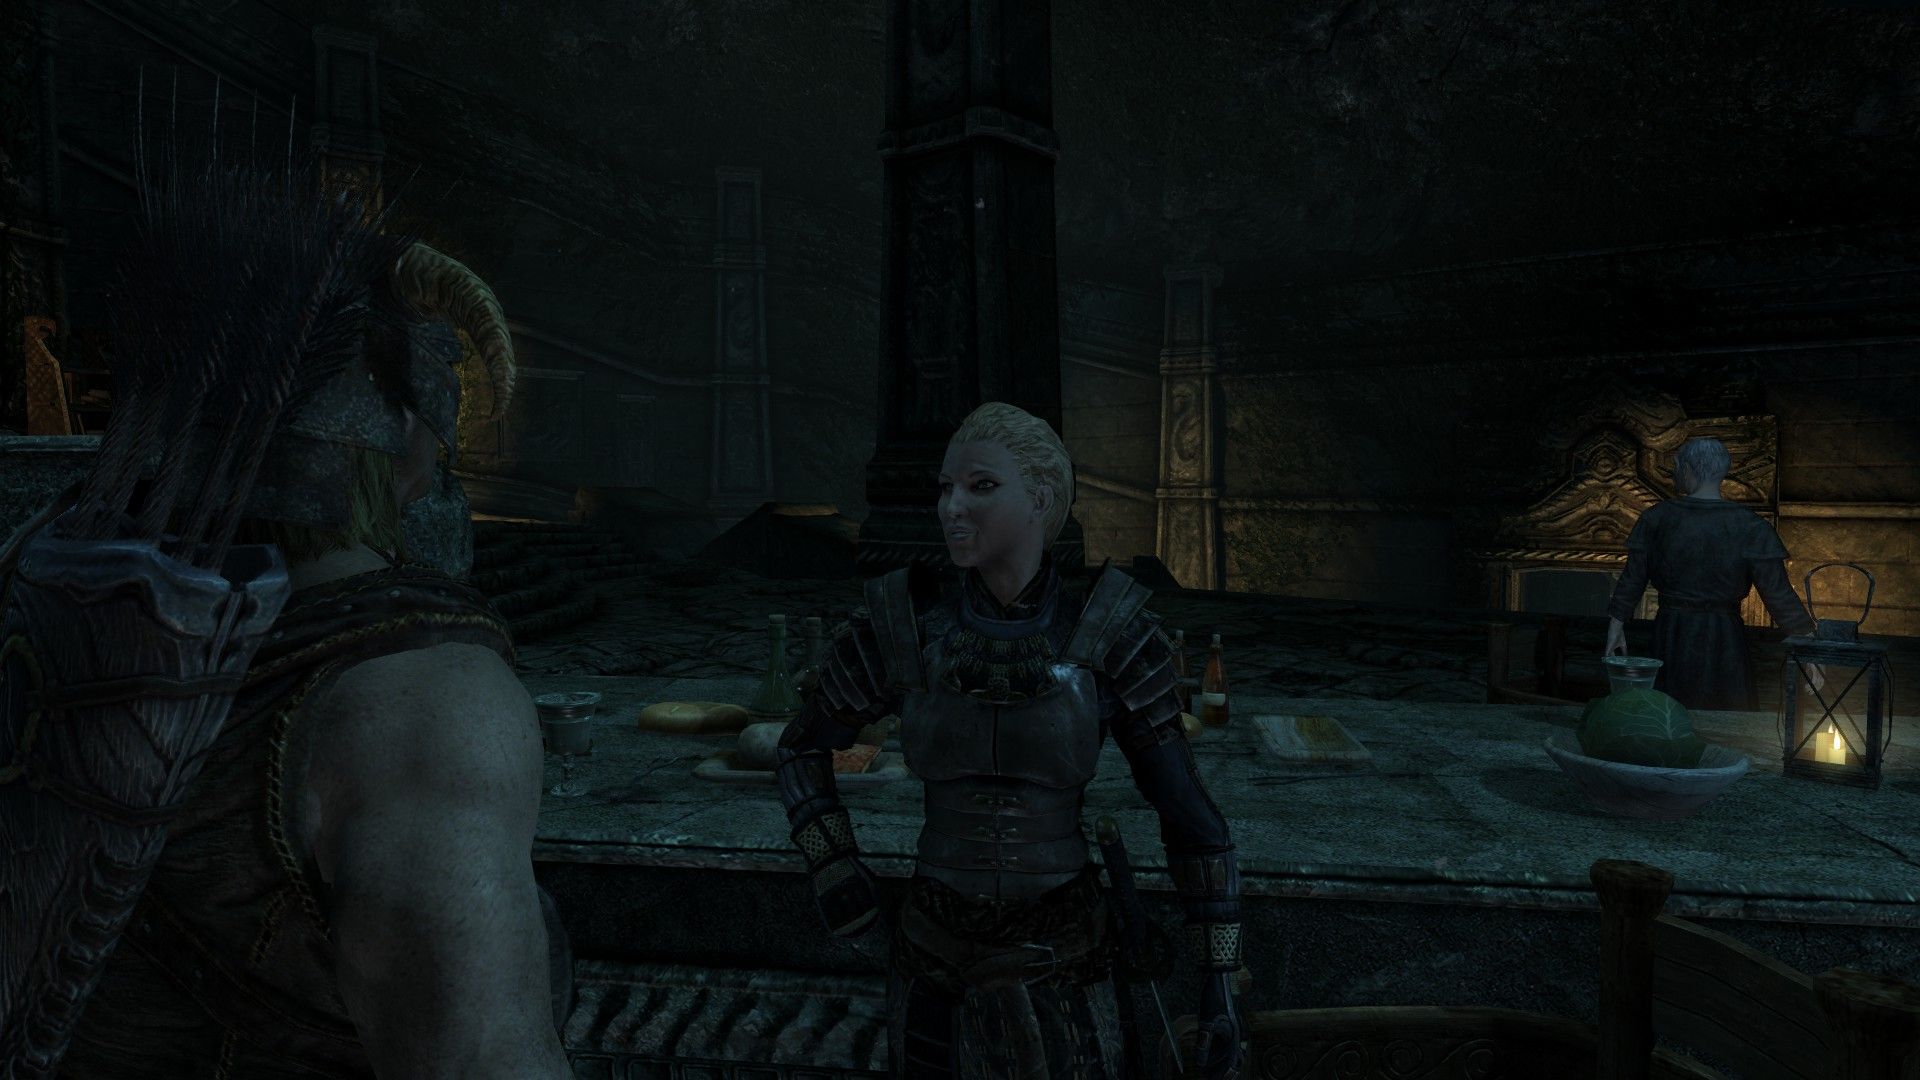 An armored woman speaks to an adventurer in an ancient temple